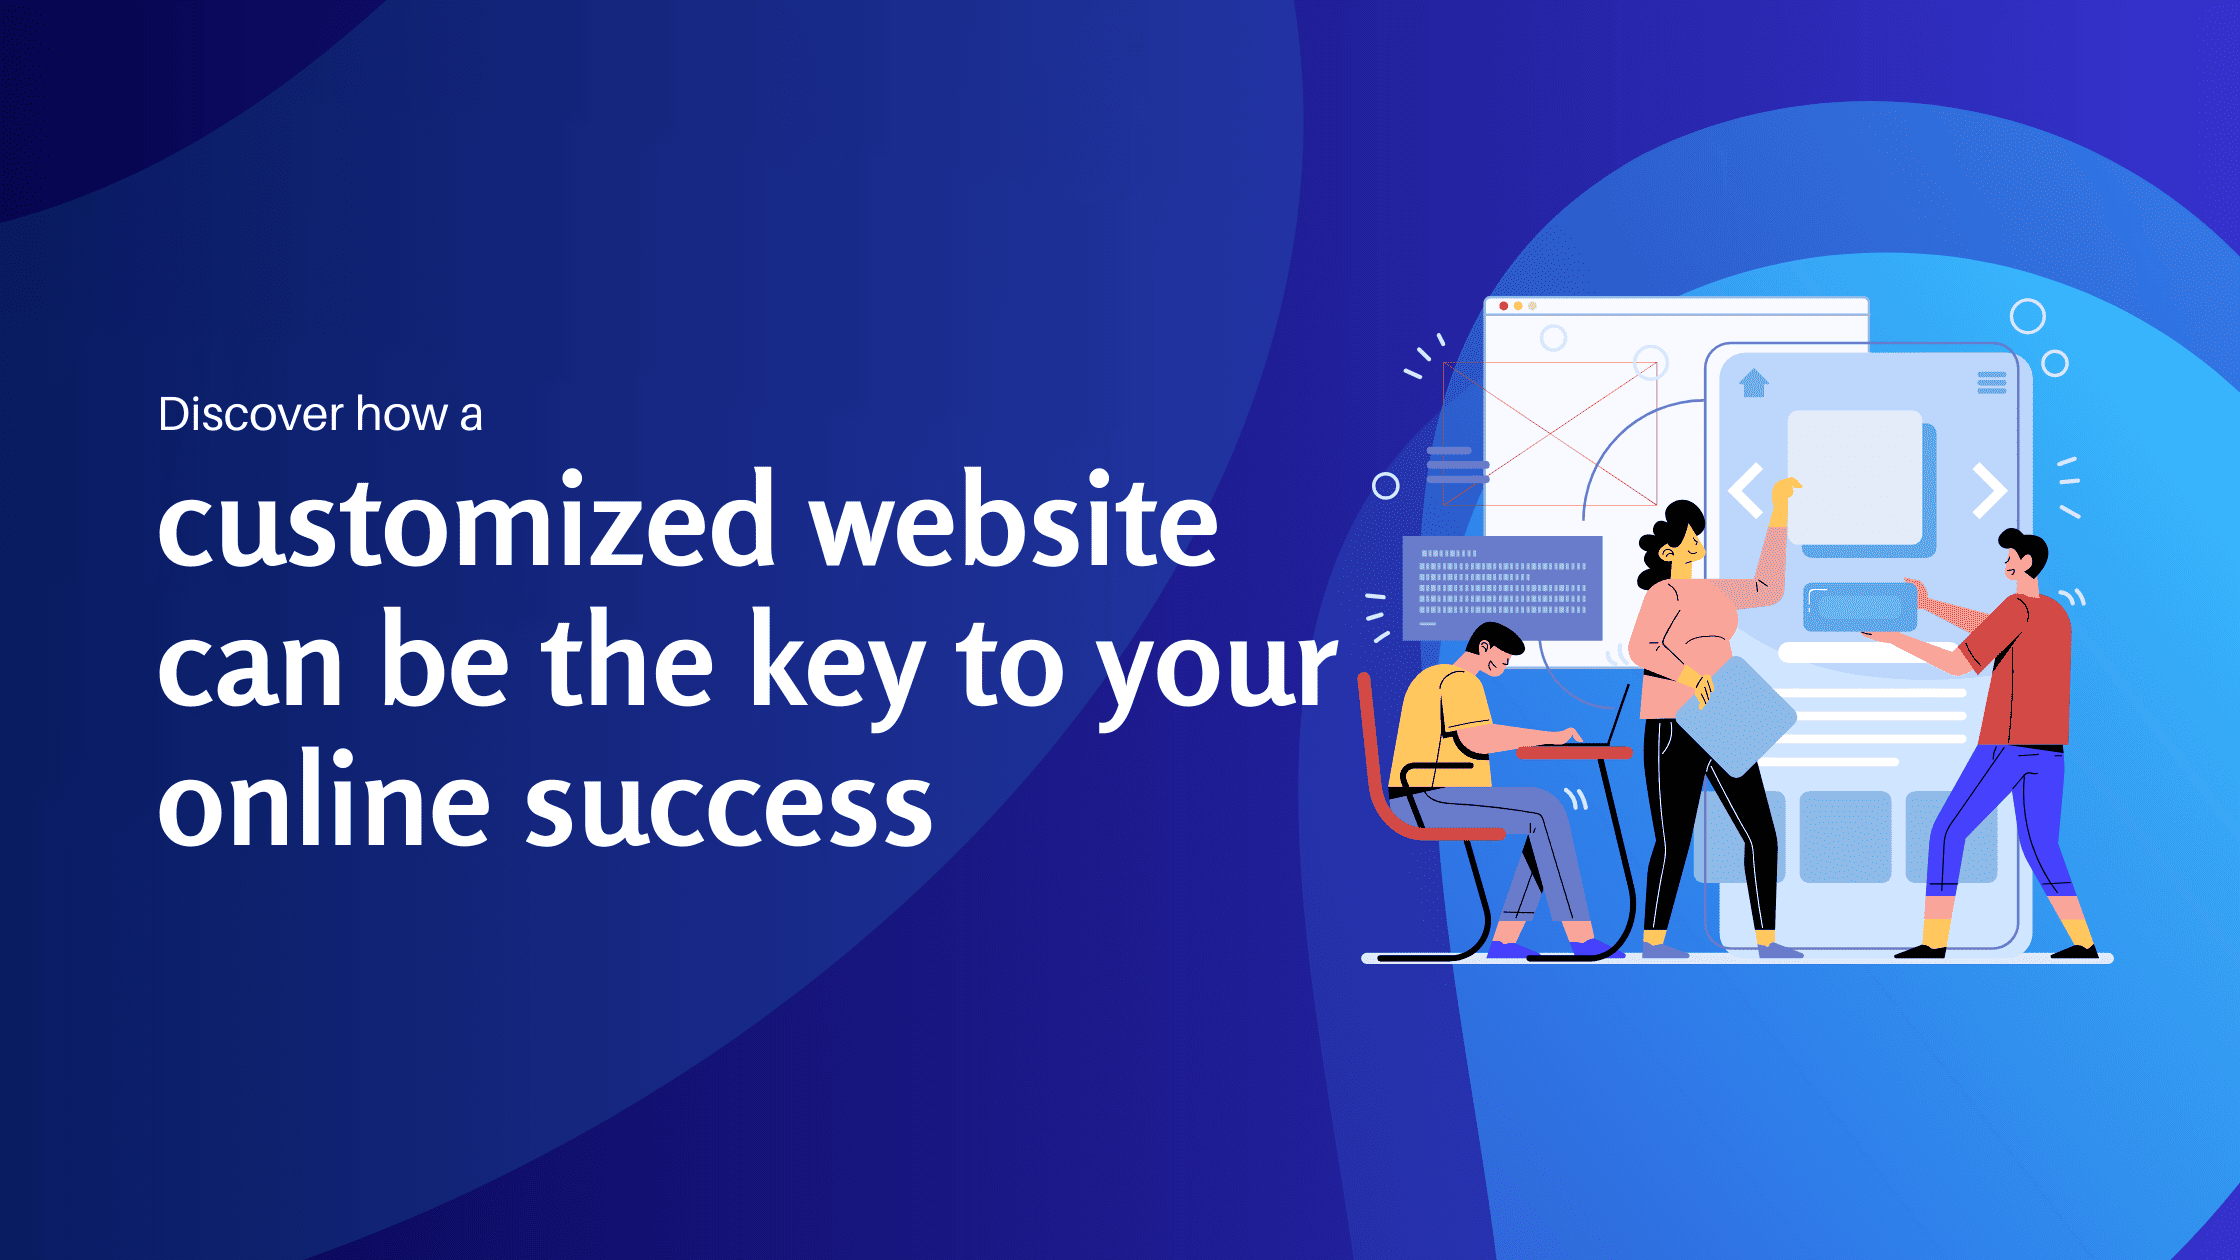 Discover how a customized website can be the key to your online success - Konectiz